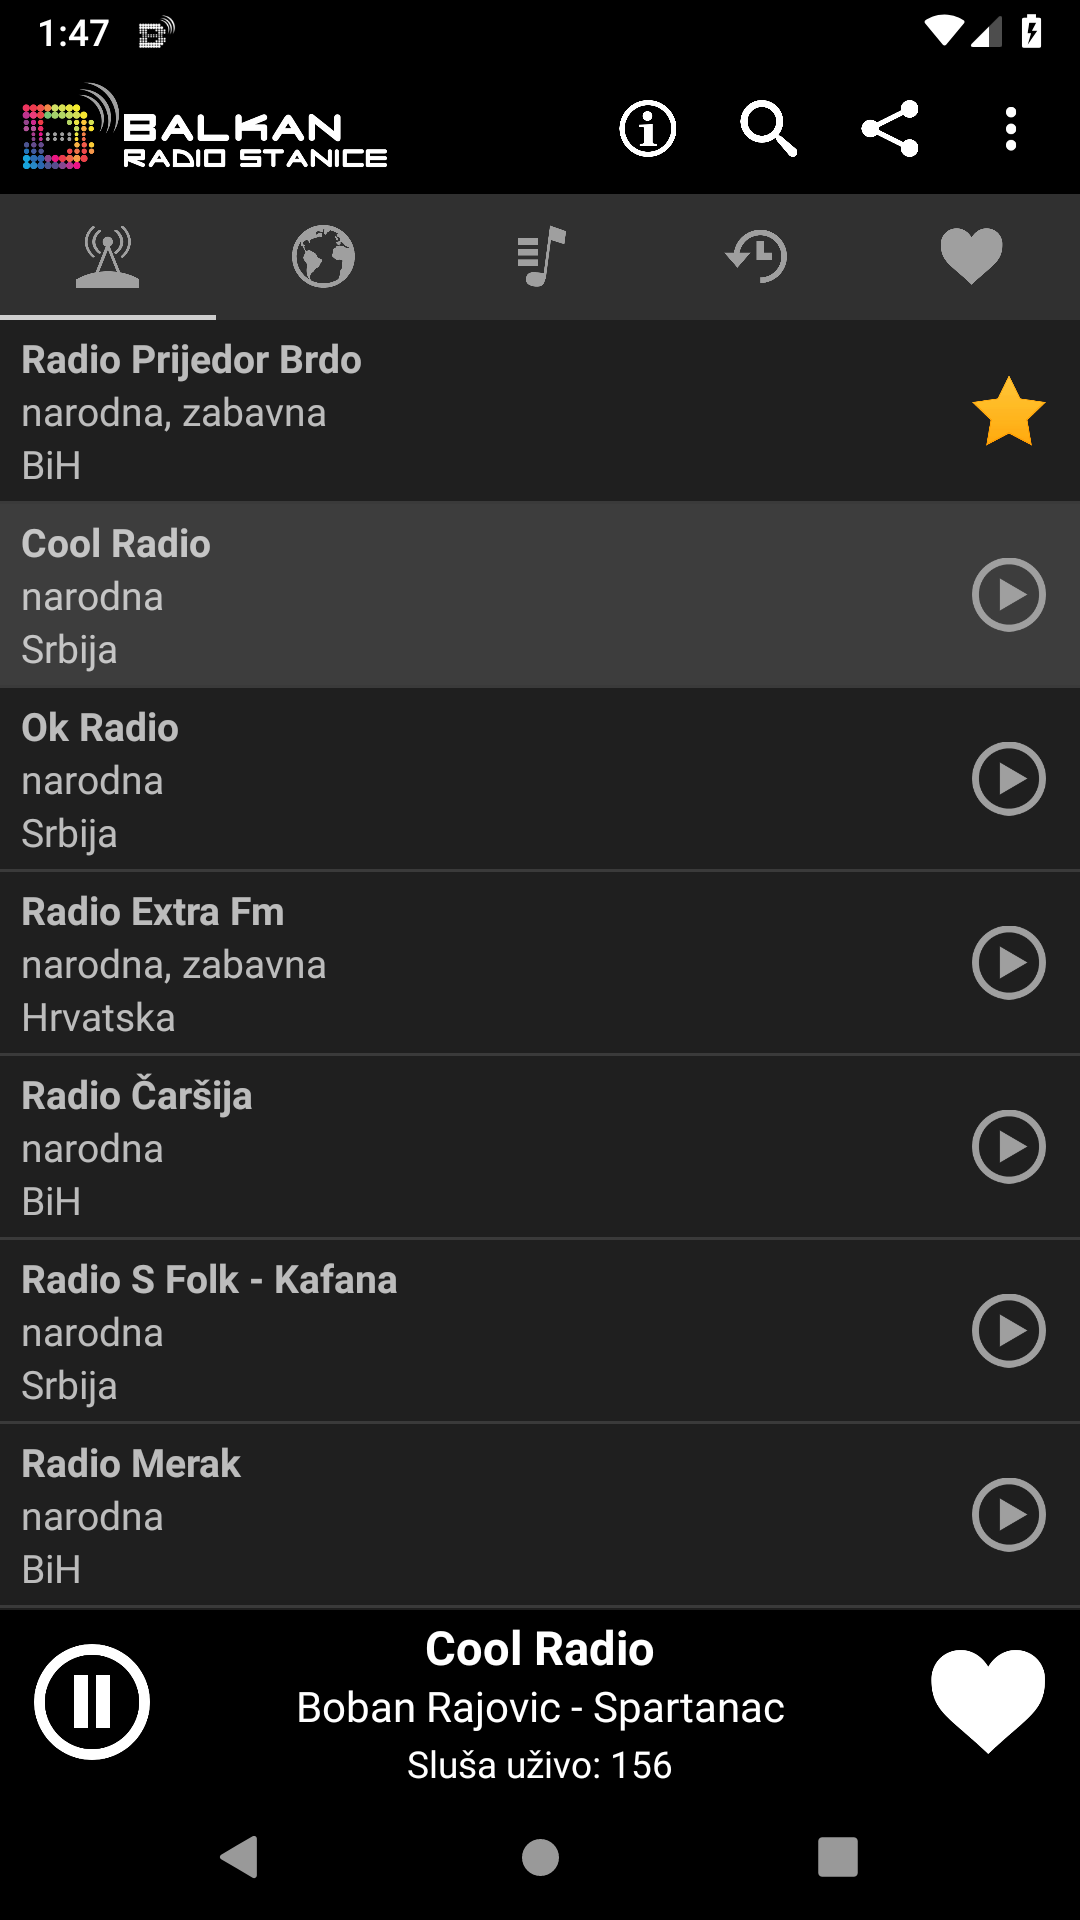 Balkan Radio Stanice APK 3.3.3 for Android – Download Balkan Radio Stanice  APK Latest Version from APKFab.com